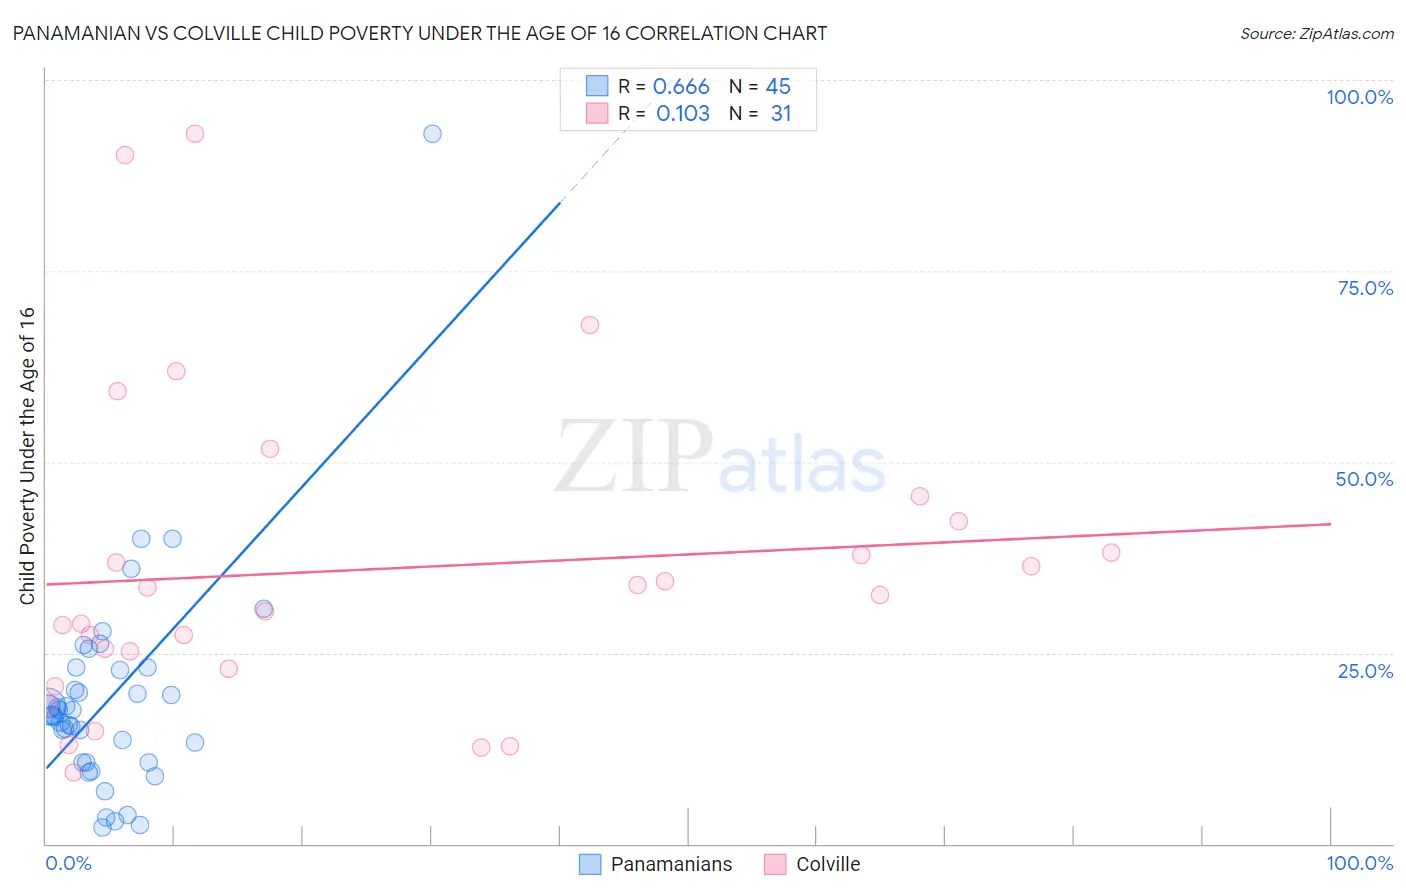 Panamanian vs Colville Child Poverty Under the Age of 16